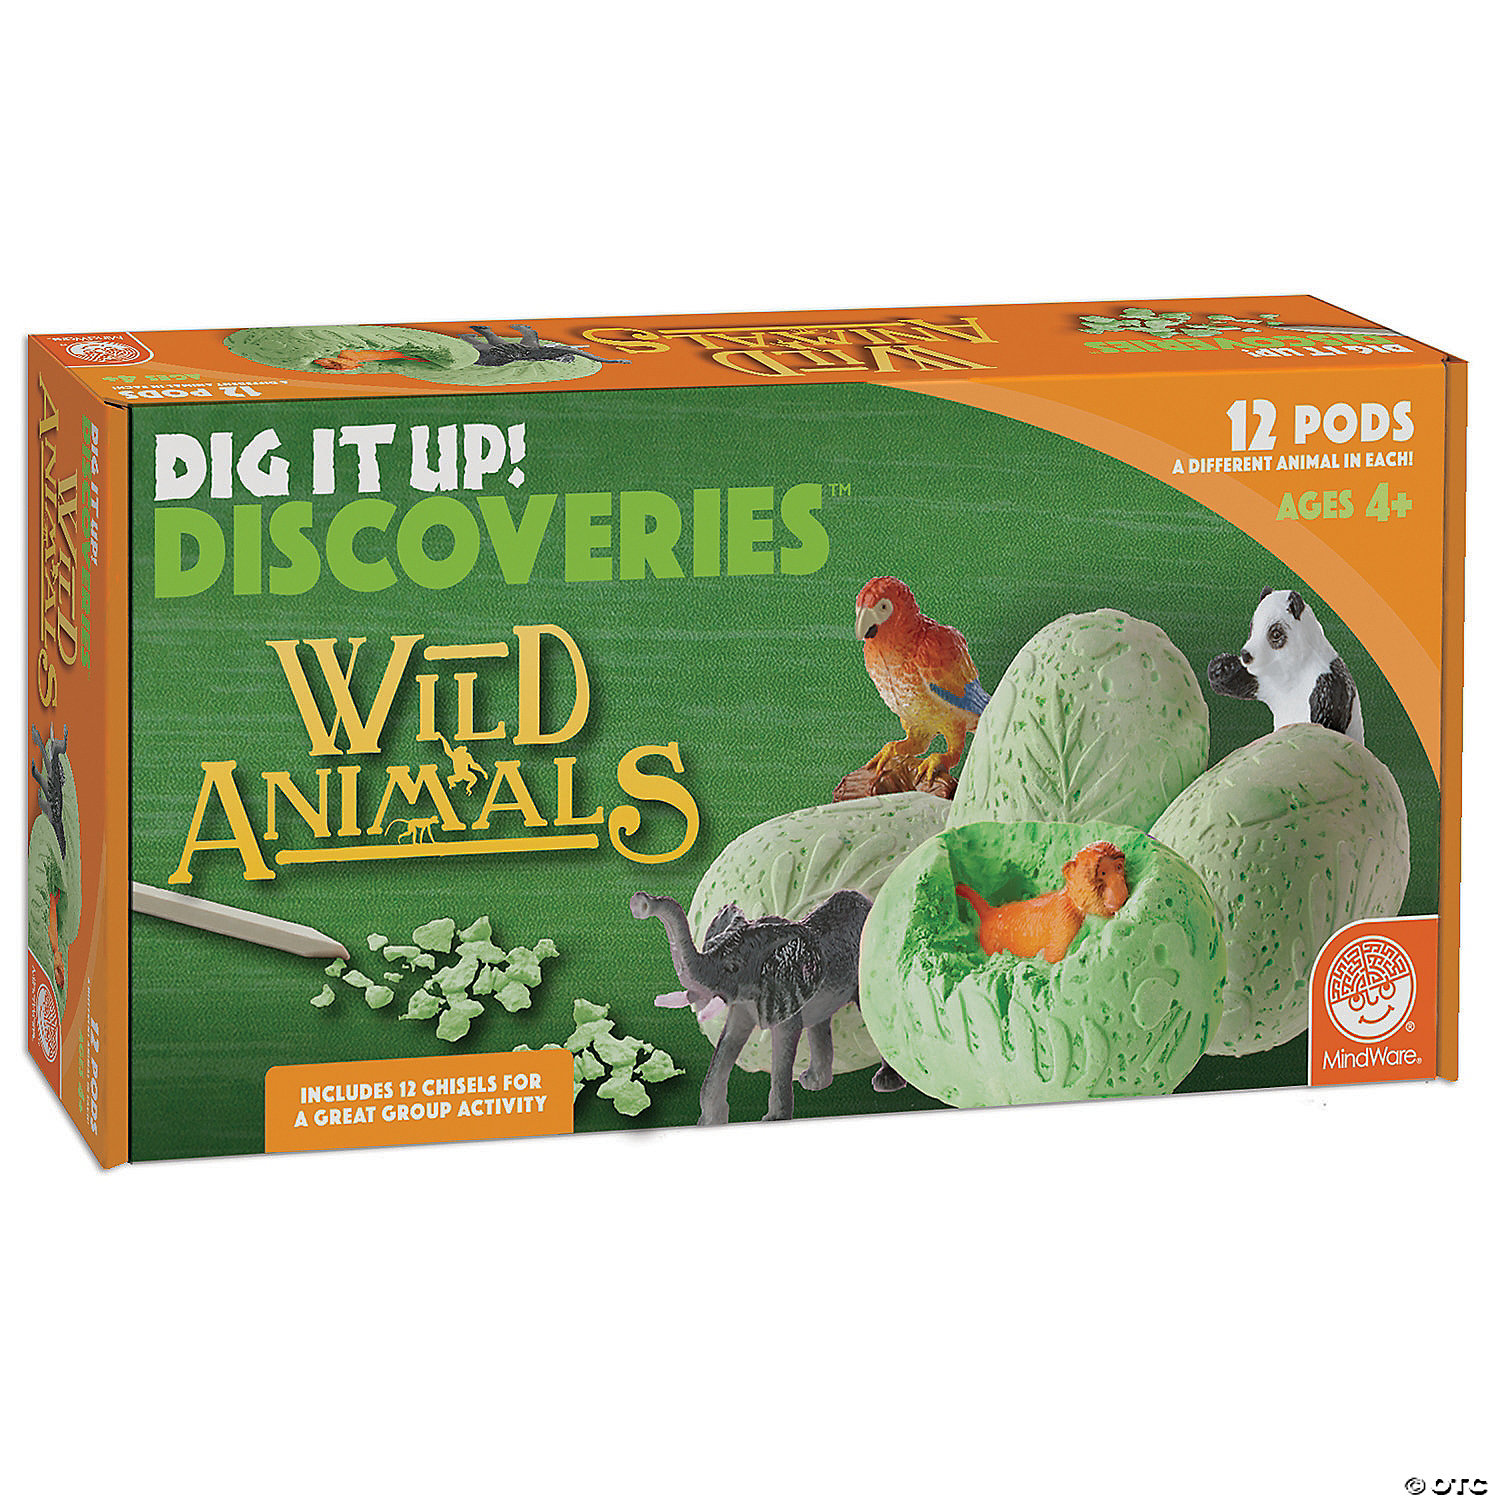 Dig It Up! Discoveries: Wild Animals | MindWare